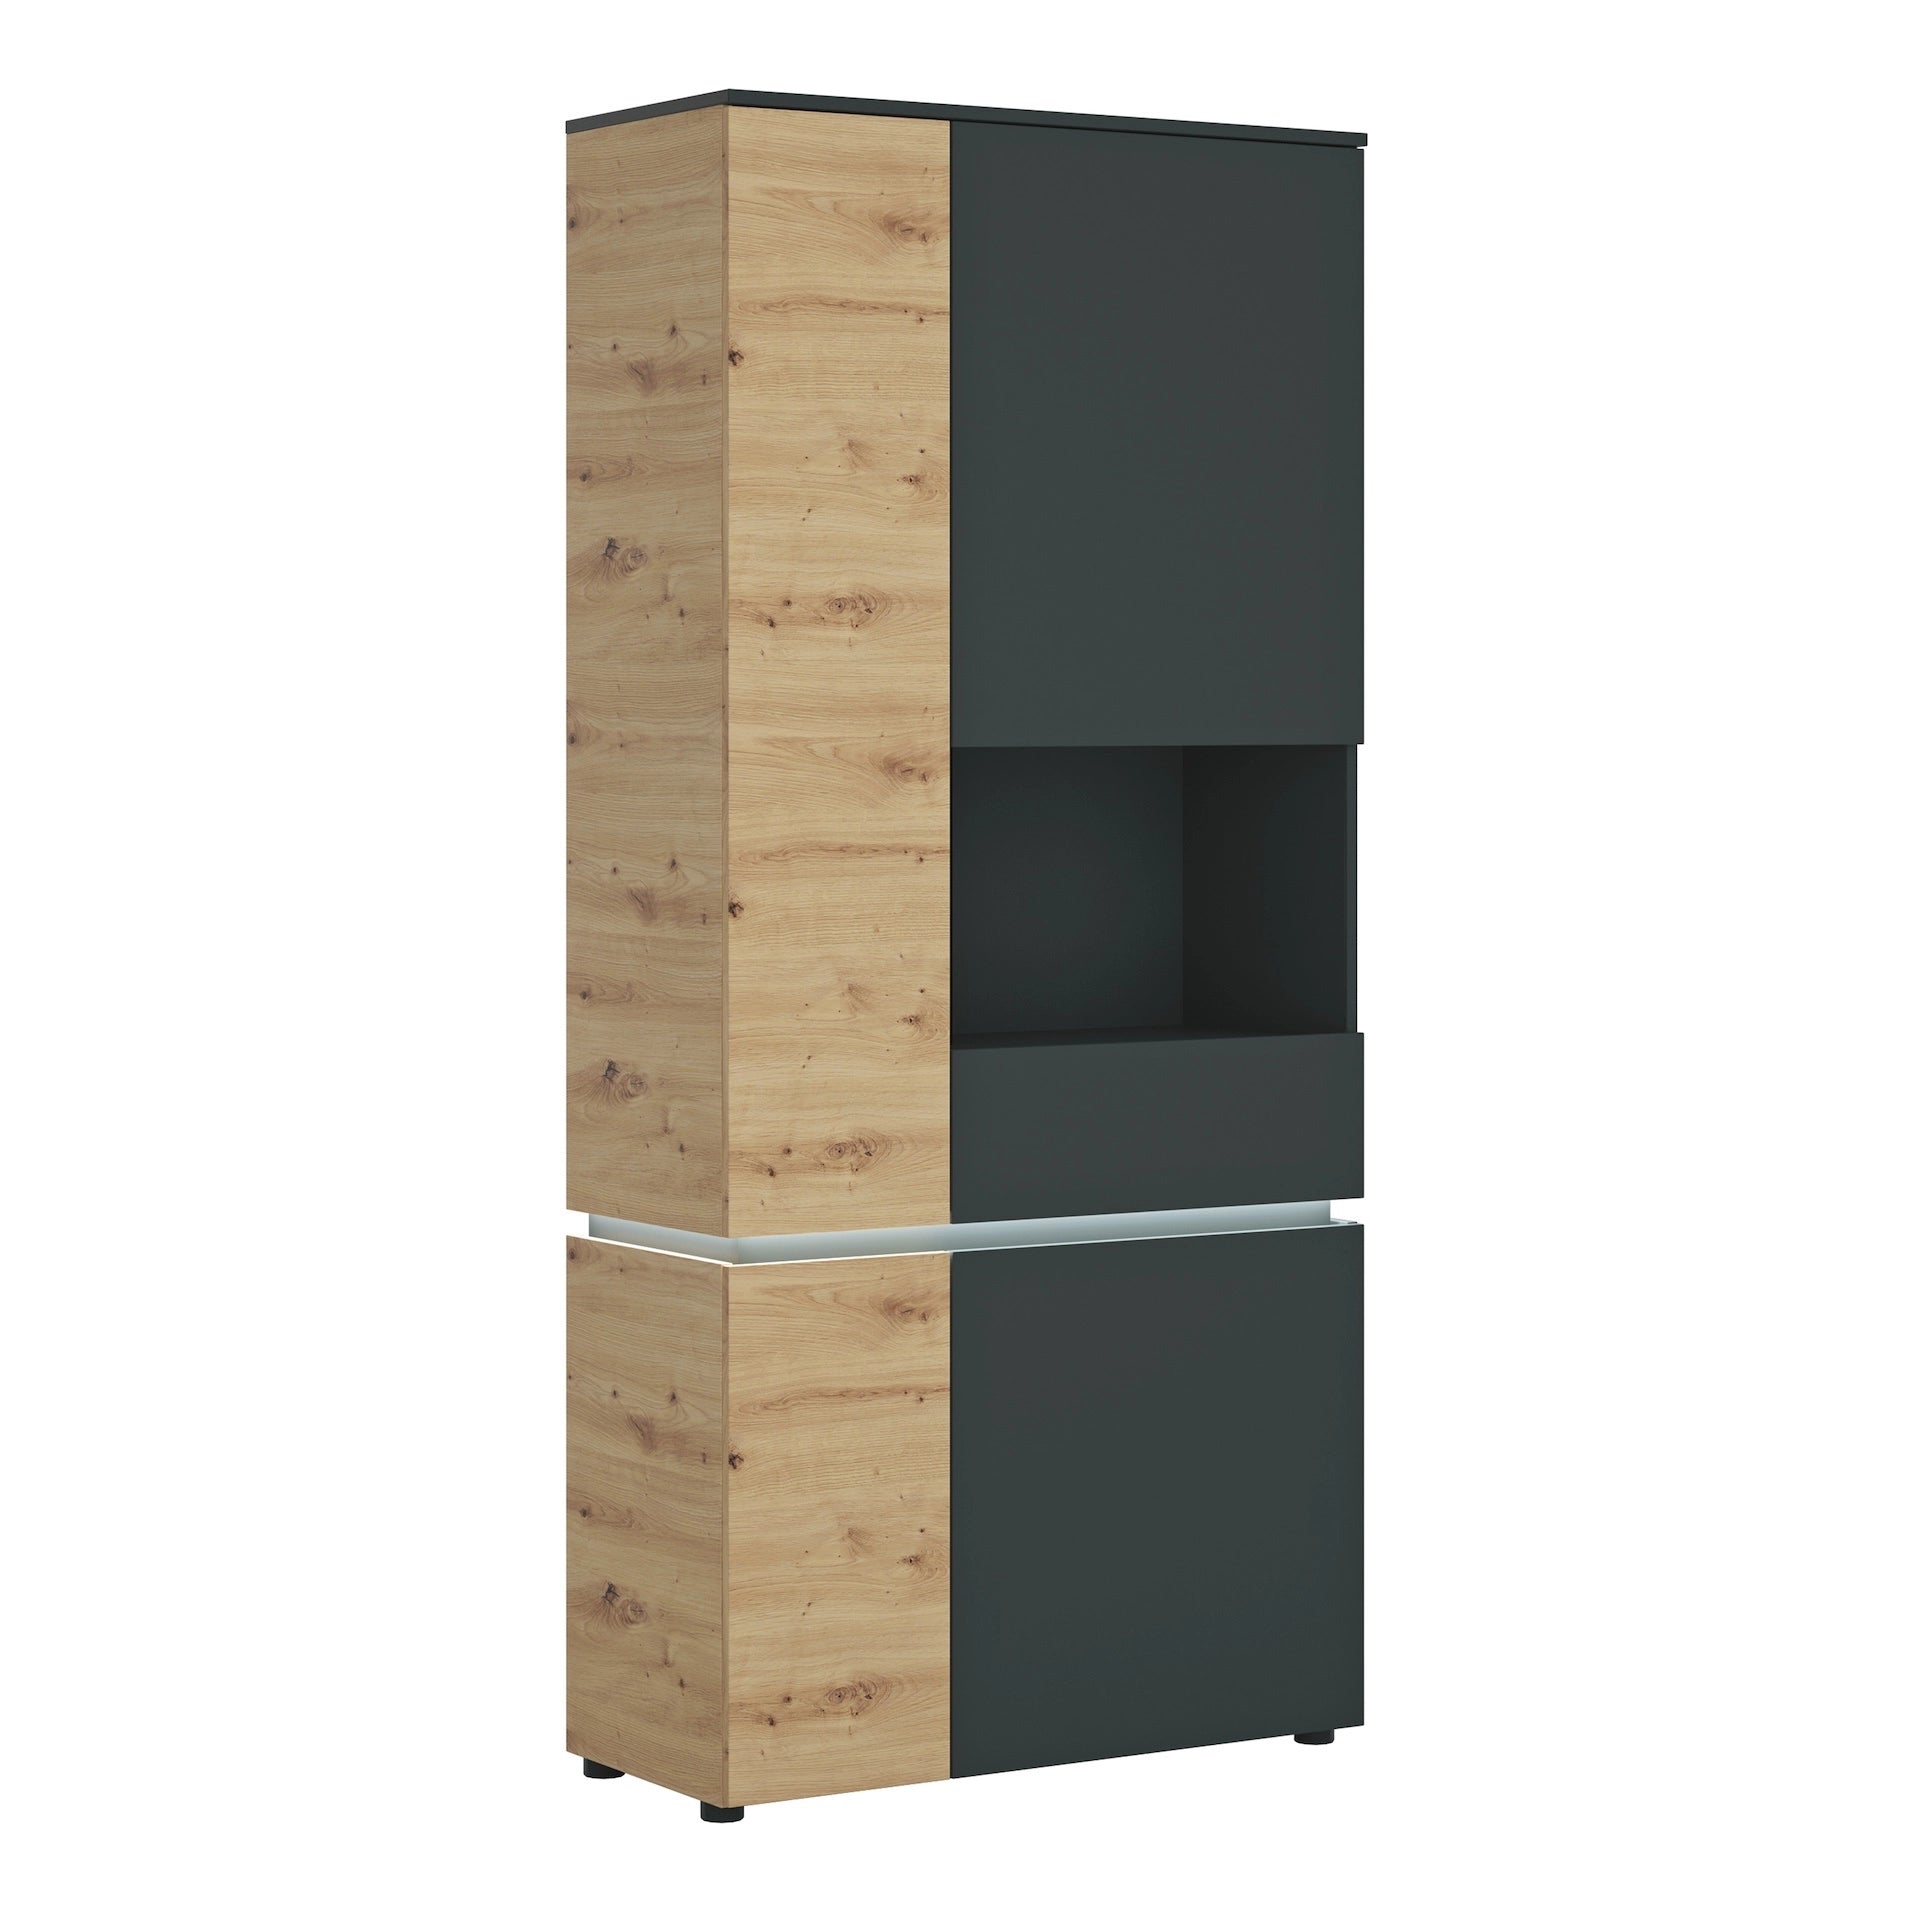 Furniture To Go Luci 4 Door Tall Display Cabinet RH (Including Led Lighting) in Platinum & Oak